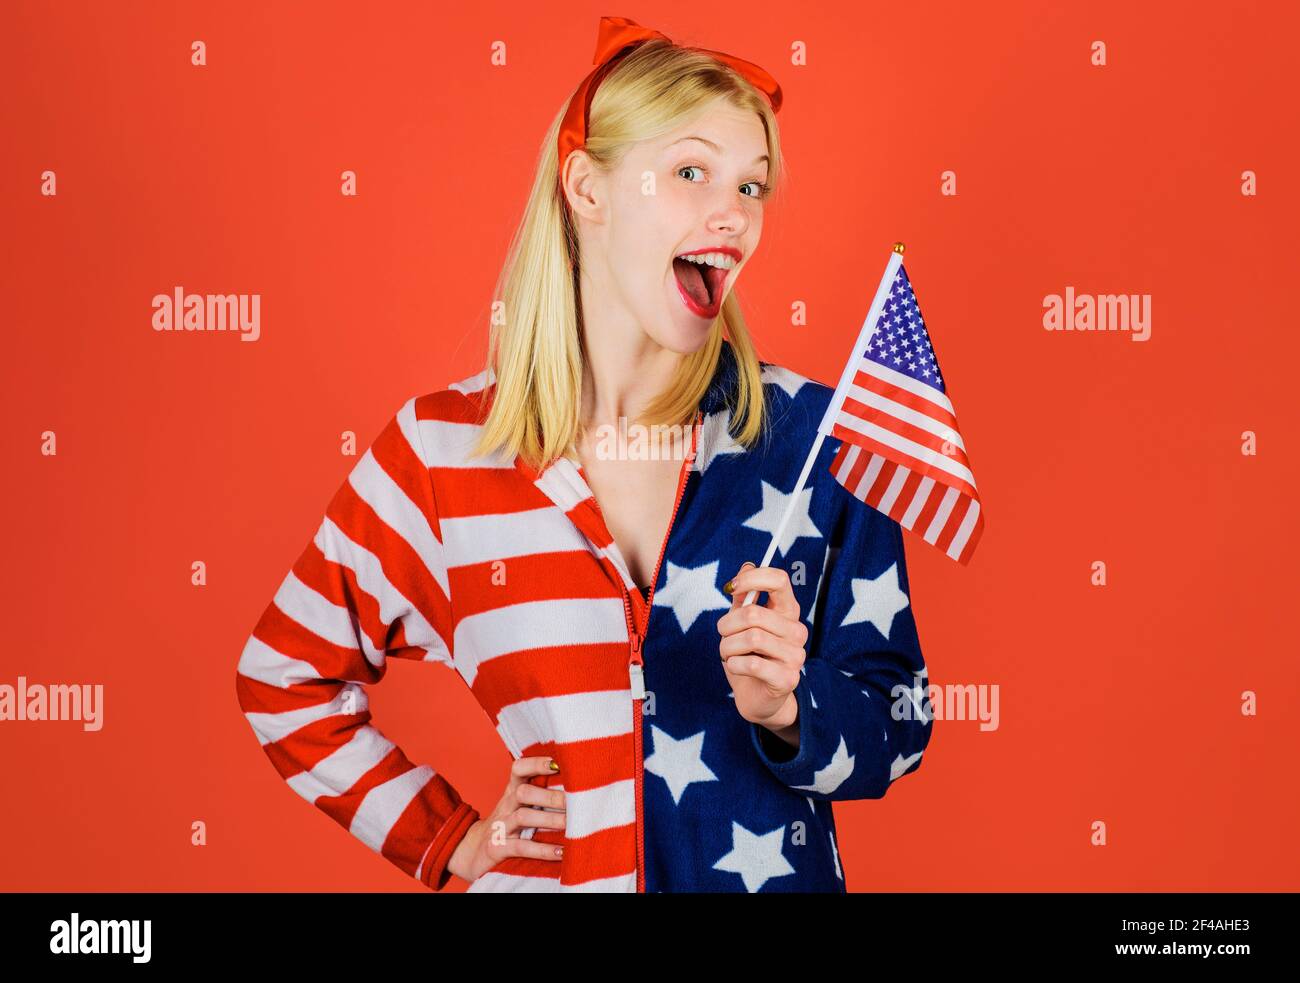 Happy Independence Day. Patriotic holiday. Smiling girl with American flag. USA celebrate 4th of July. Stock Photo